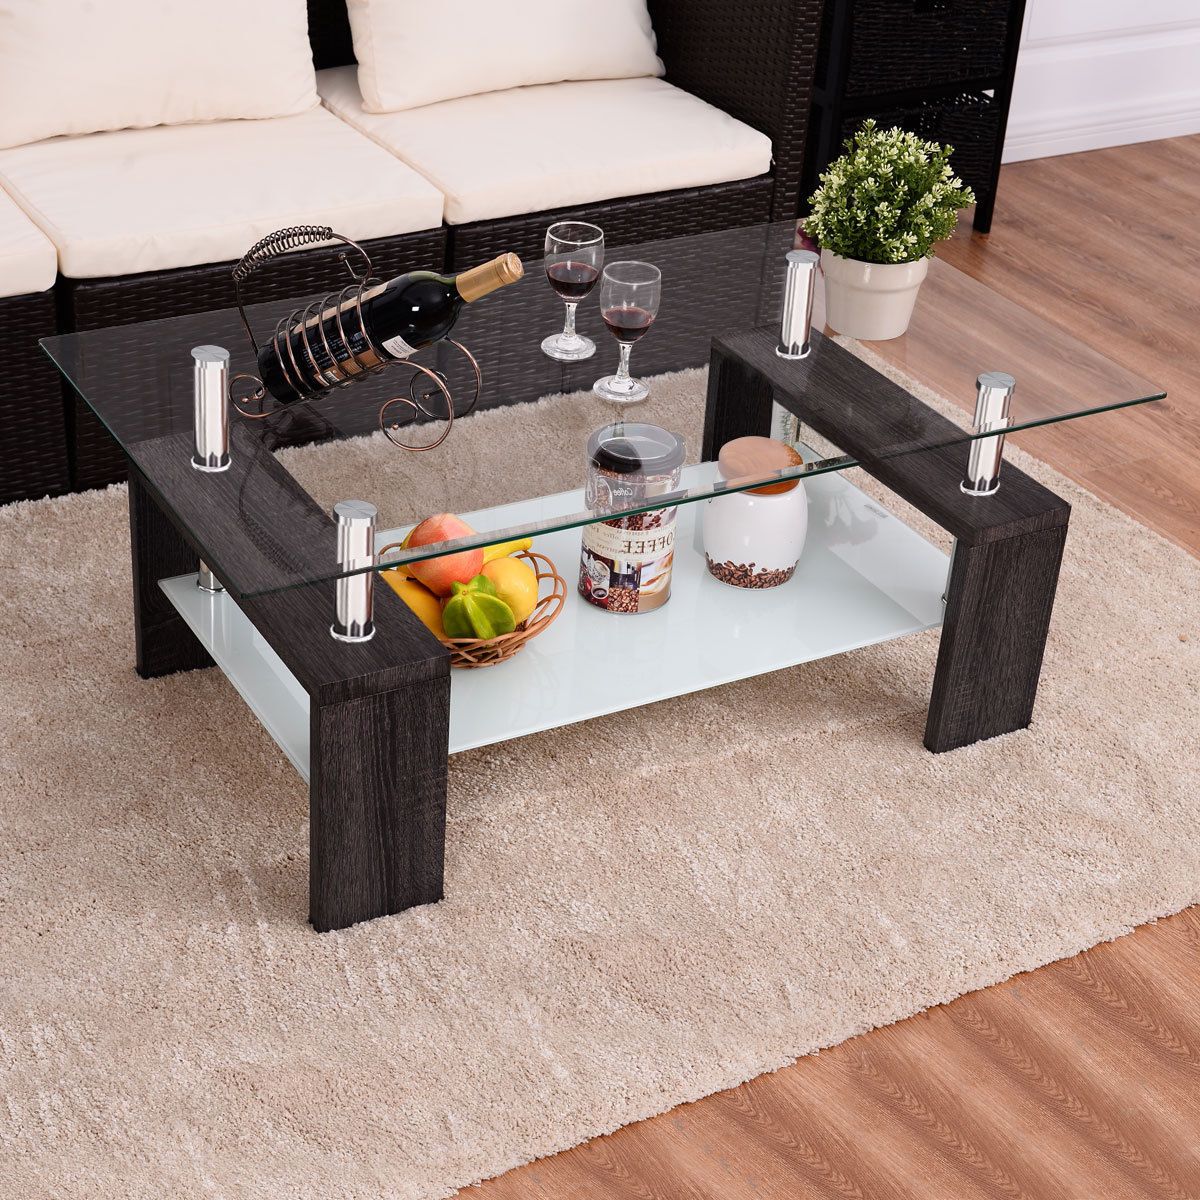 Wood Rectangular Coffee Tables For Widely Used Wood Tempered Glass Top Coffee Table Rectangular W/ Shelf Home (View 4 of 10)